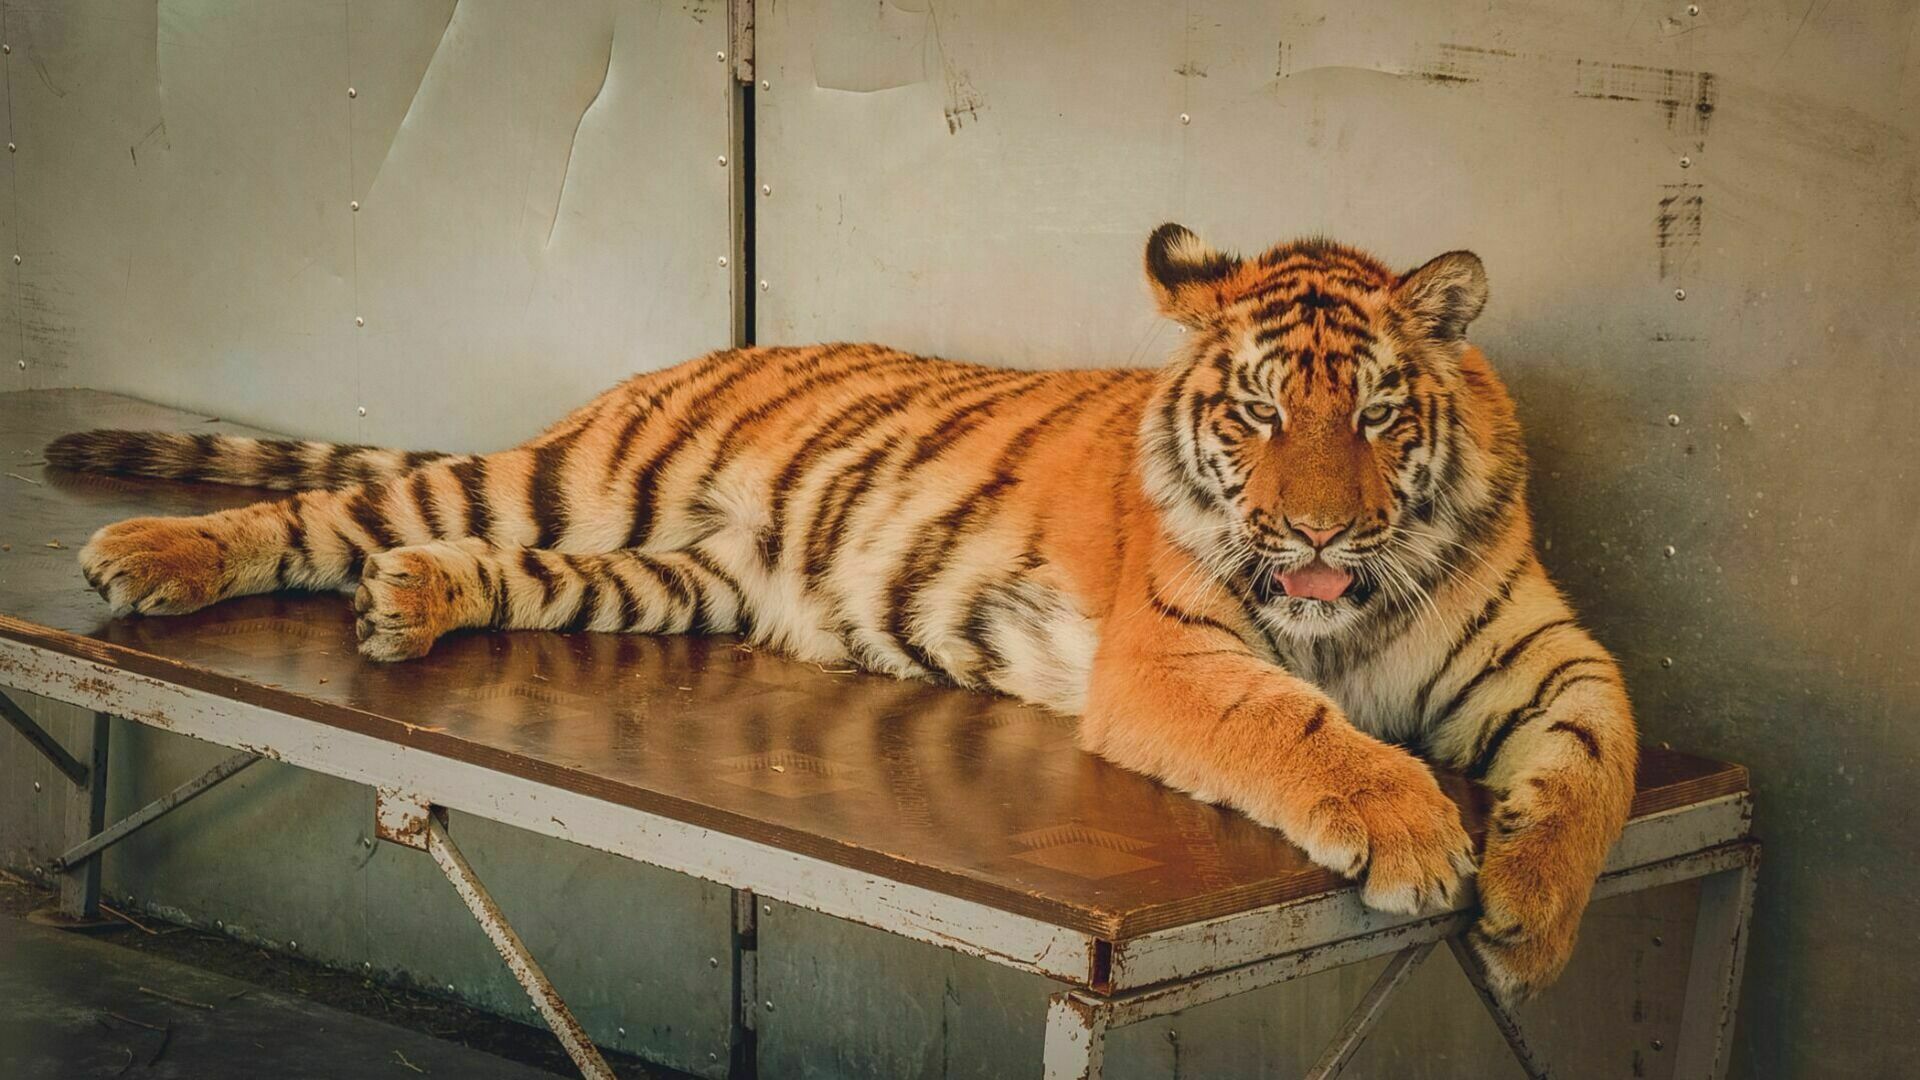 In the Khabarovsk Territory, a tiger killed a hunter